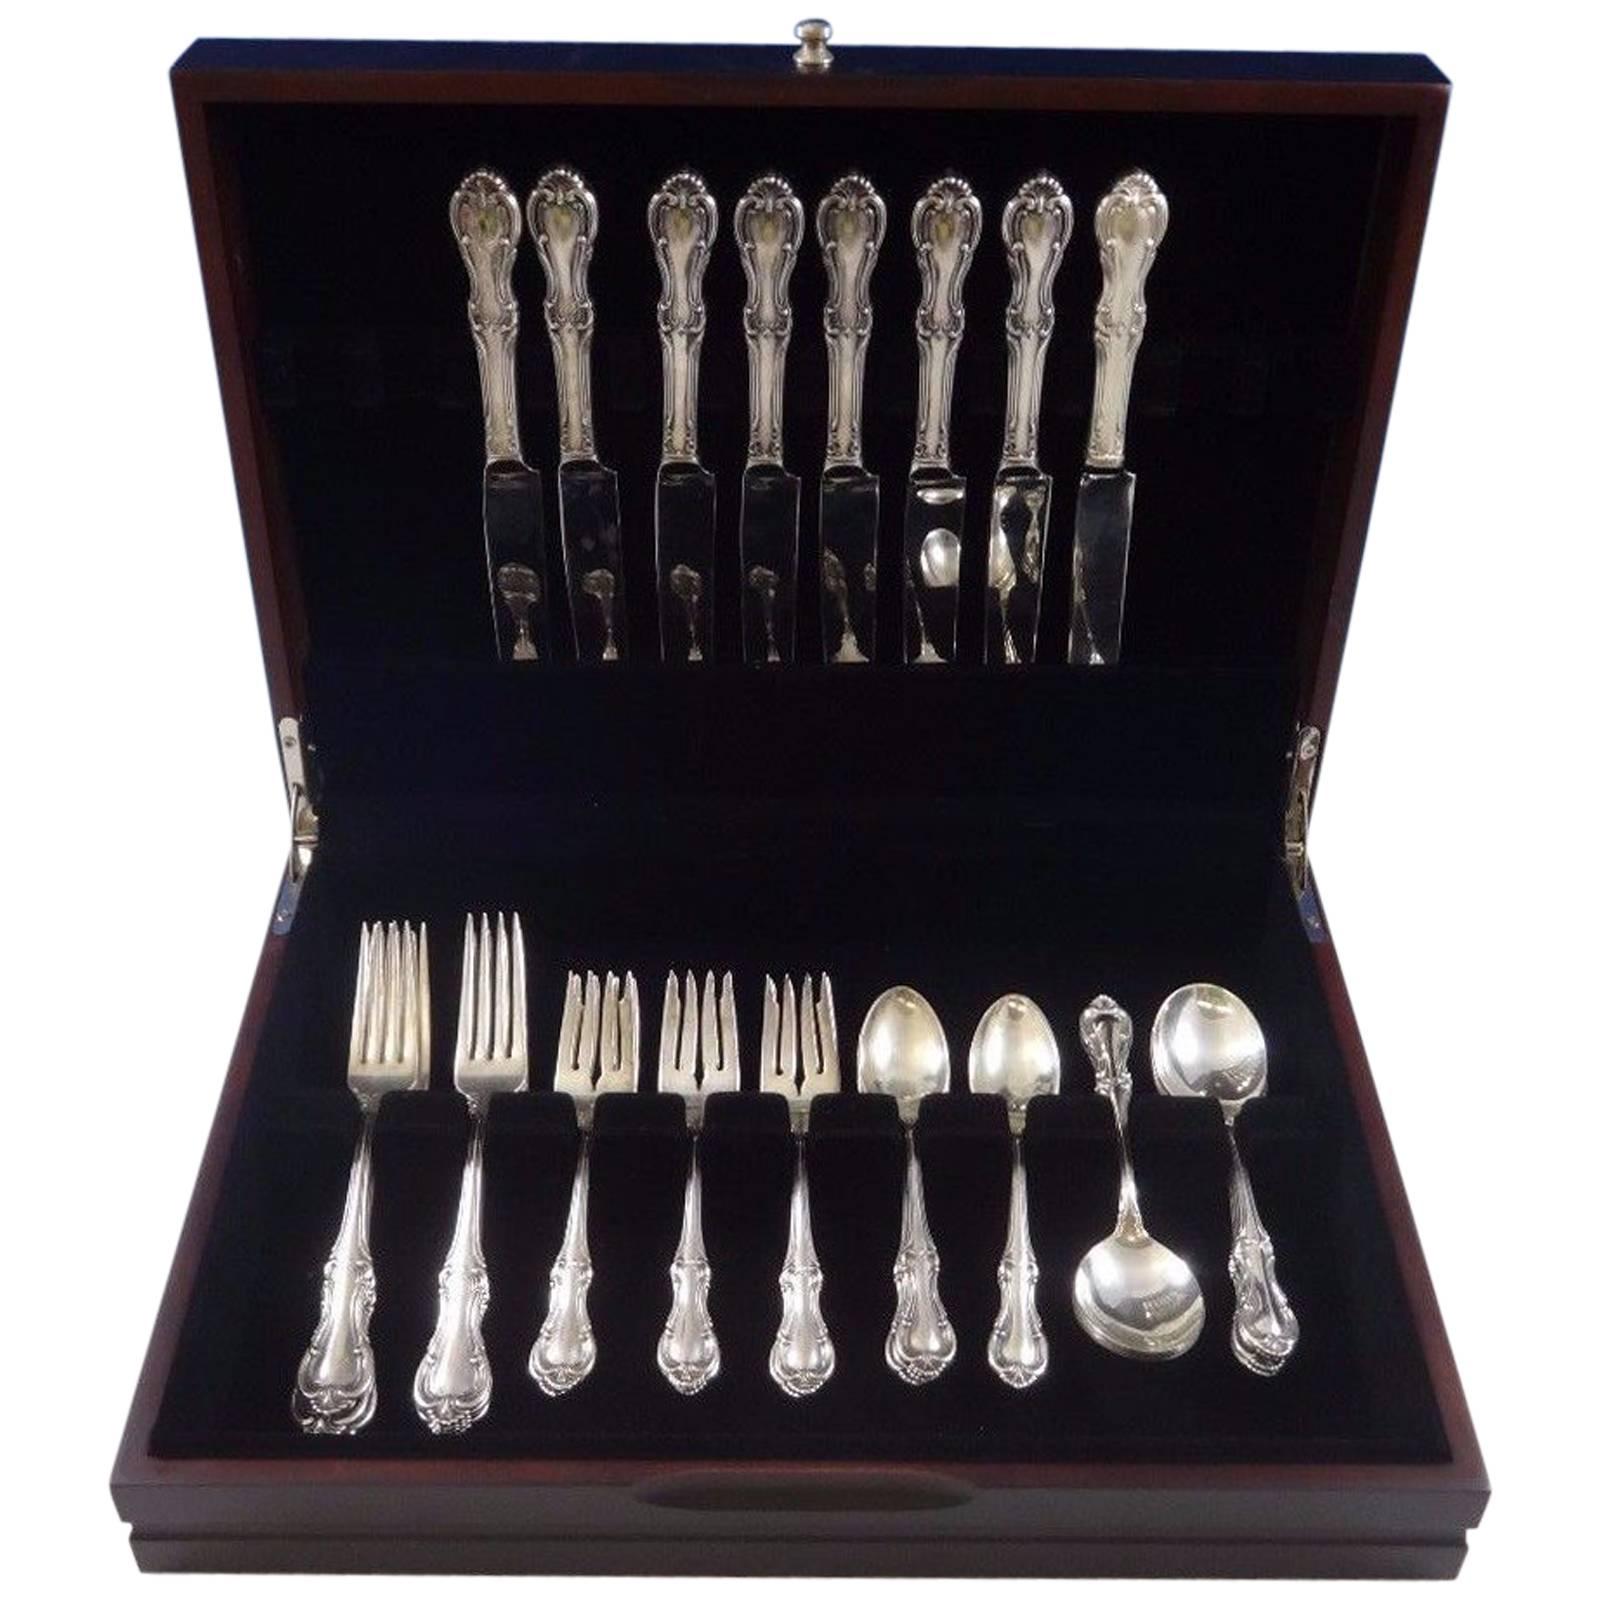 Joan of Arc by International Sterling Silver Flatware Set of 8 Service 40 Pieces